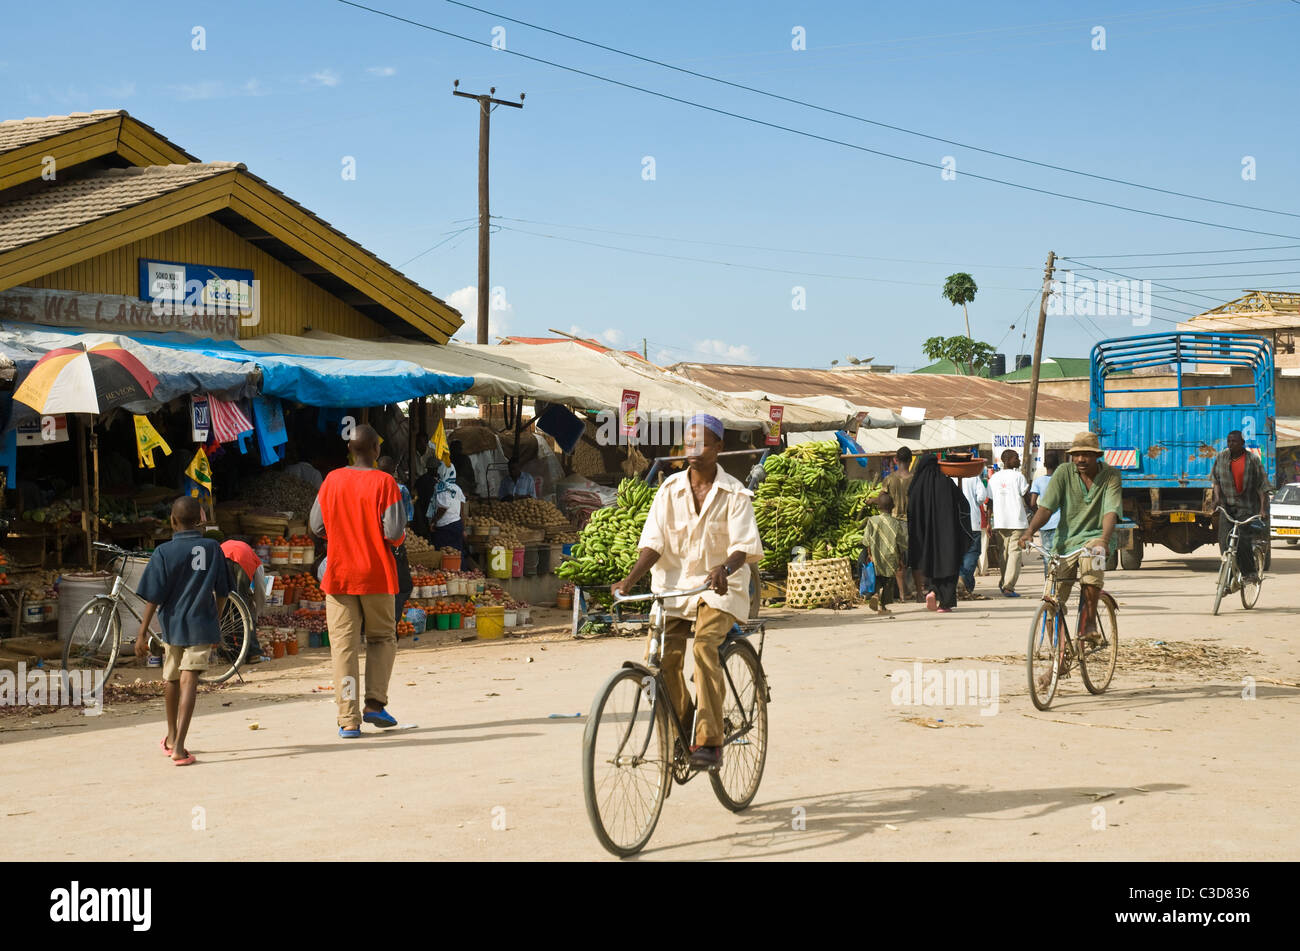 Man on a bicycle in the busy market area of Dodoma Tanzania Stock Photo